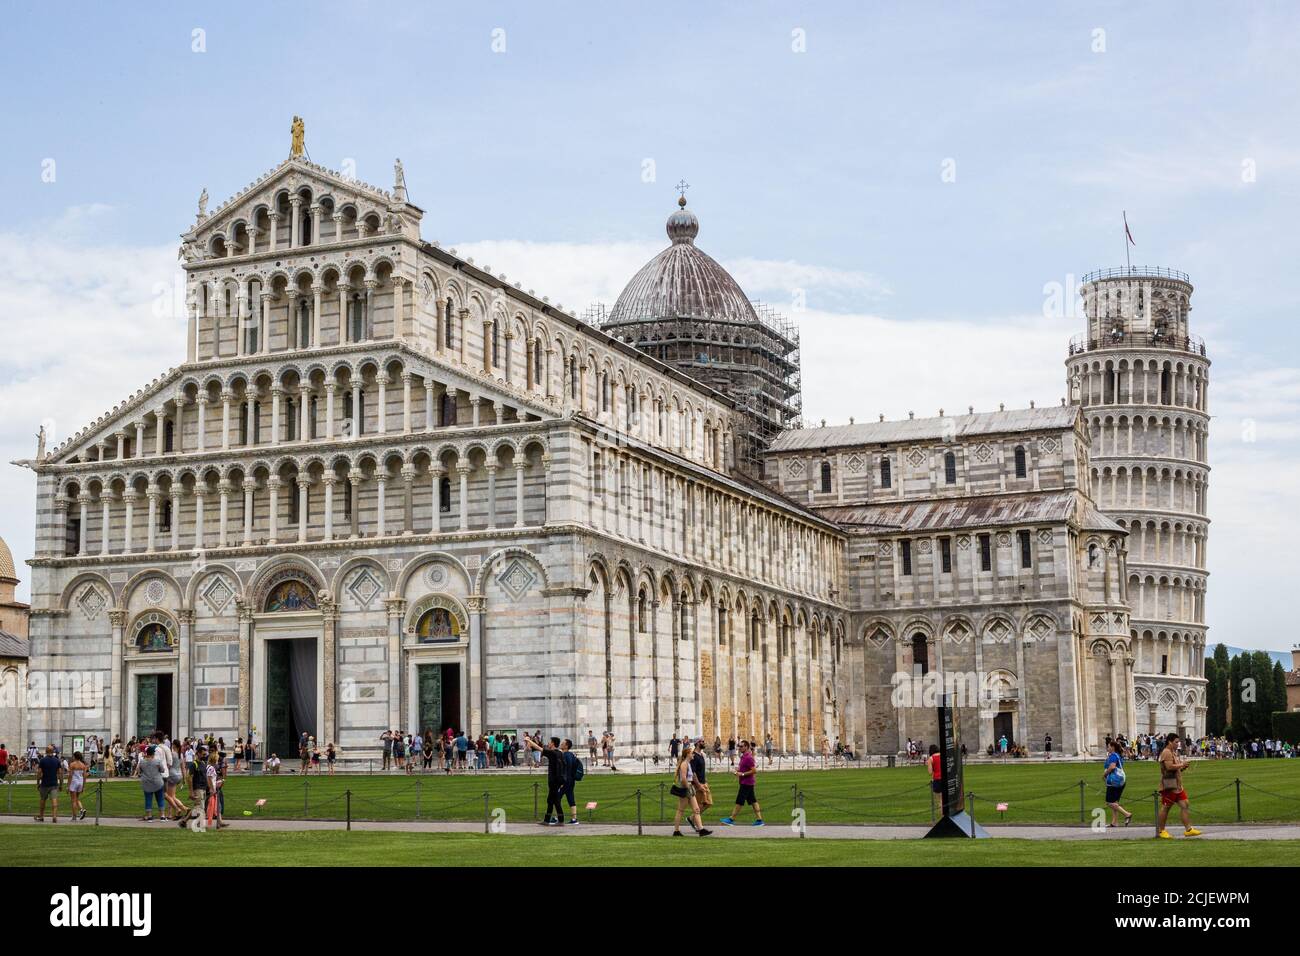 Pisa, Italy - July 9, 2017: View of Tourists, Pisa Cathedral and Leaning Tower in Piazza dei Miracoli Stock Photo